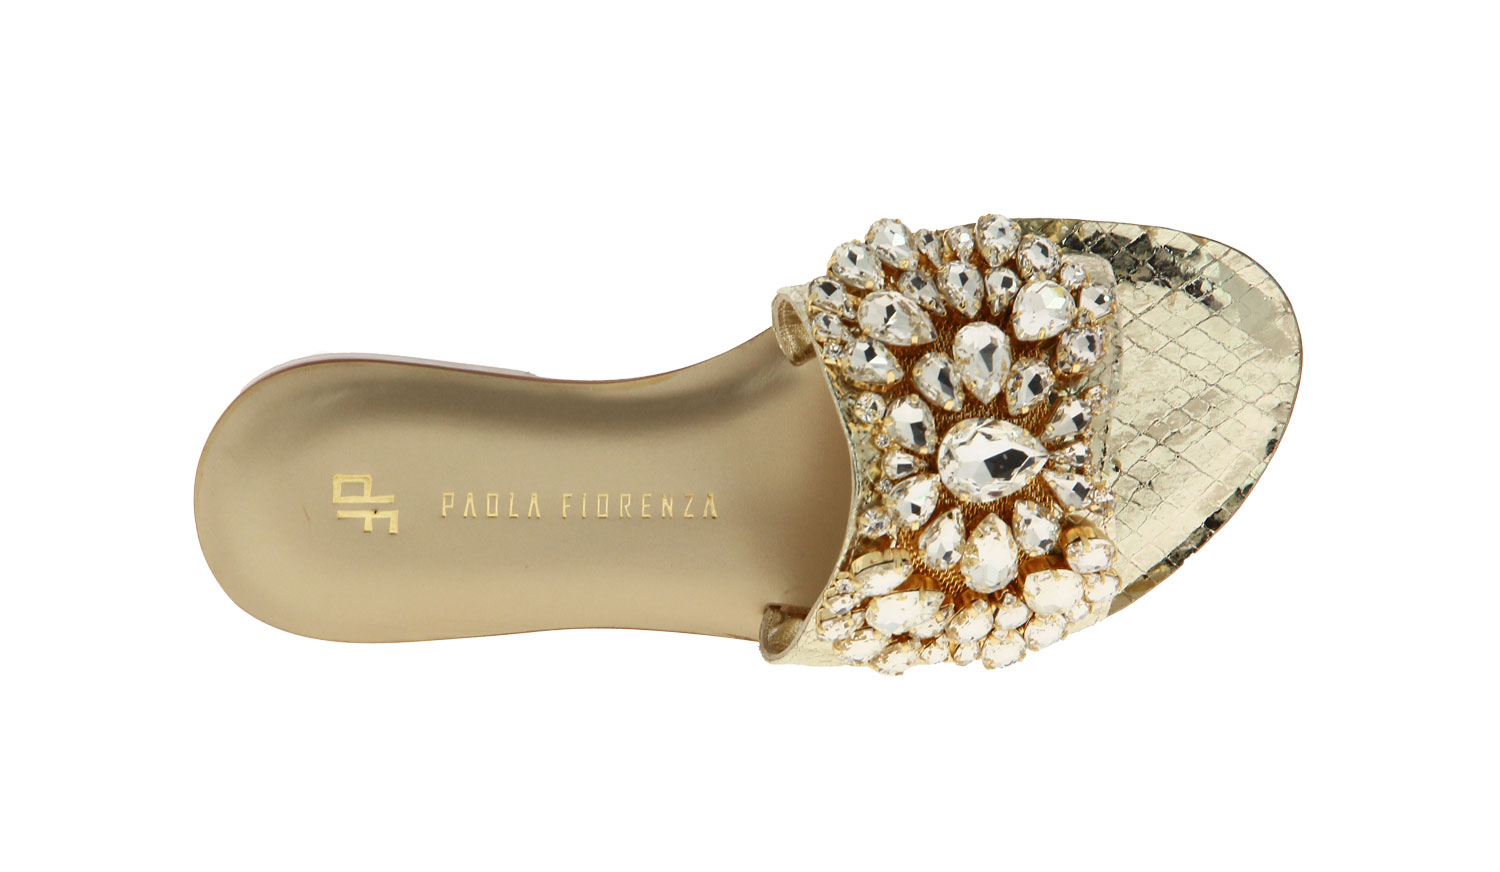 Paola Fiorenza Pantolette CRYSTAL BIANCO GOLD (39)